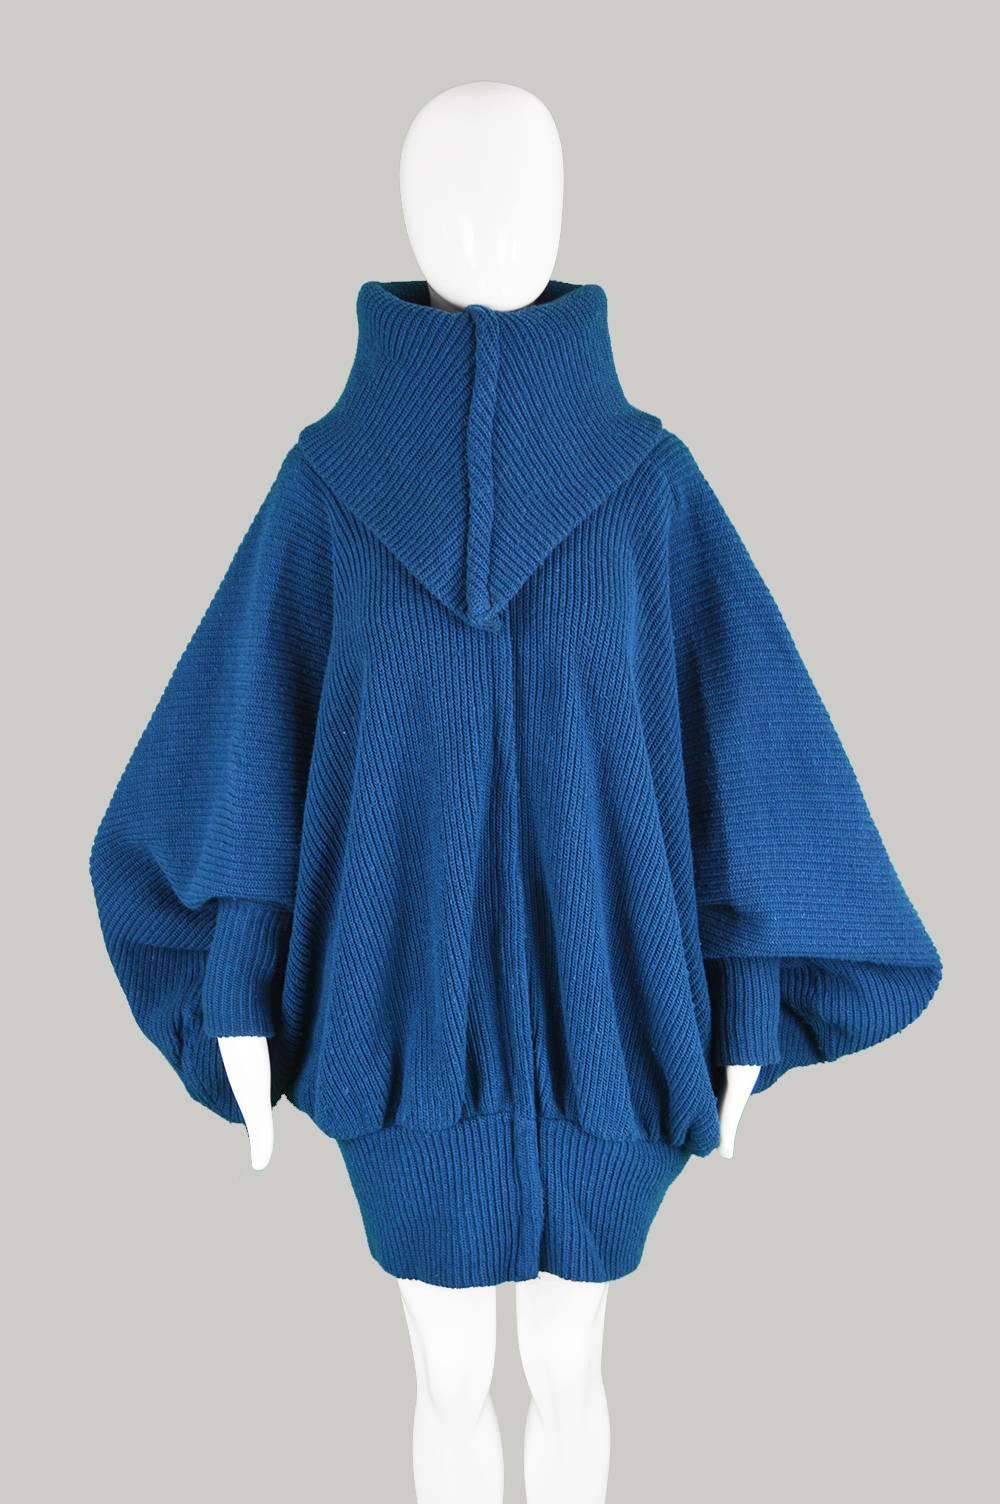 Norma Kamali Avant Garde Batwing Knit Vintage Jacket, 1980s In Excellent Condition In Doncaster, South Yorkshire